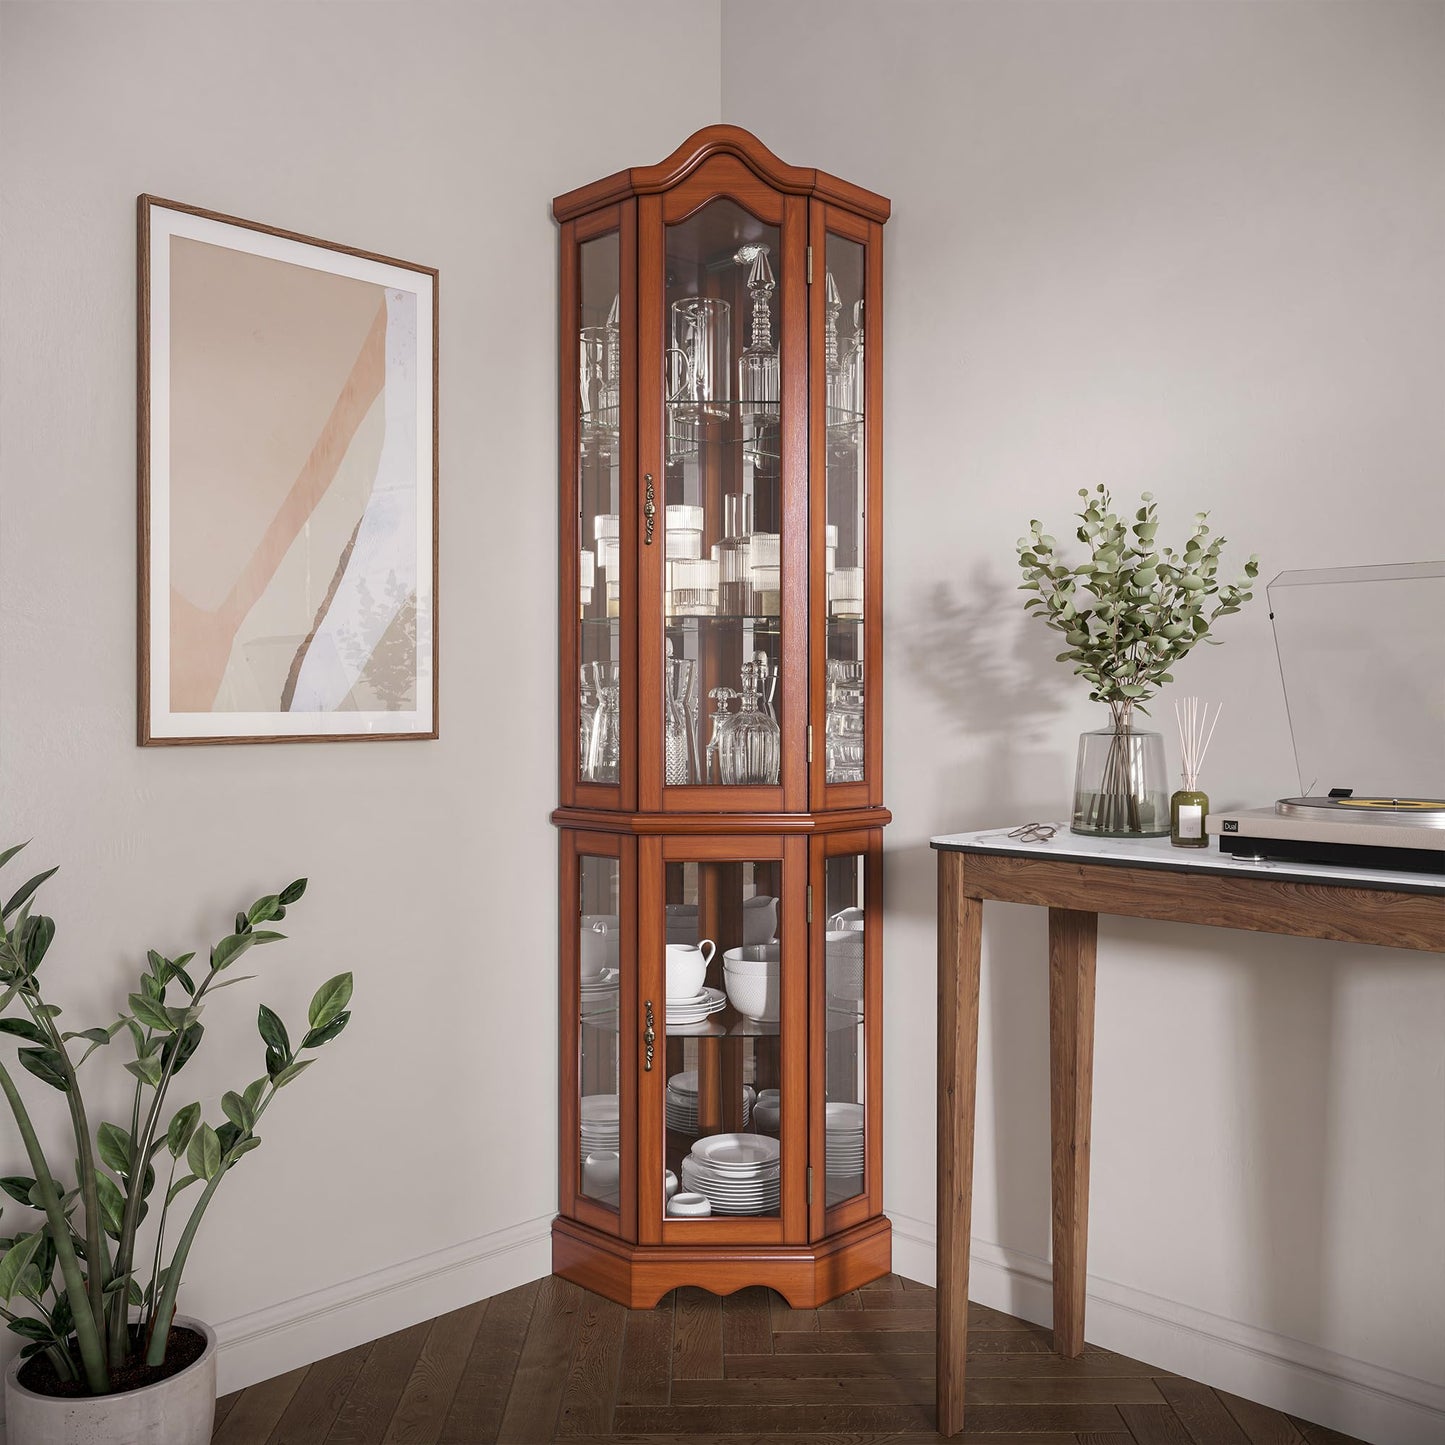 BELLEZE Lighted 3-Side Glass Display Curio Cabinet w/Tempered Glass Doors and Shelves, Curved Wood Corner Cabinet with Bulb, Corner Storage